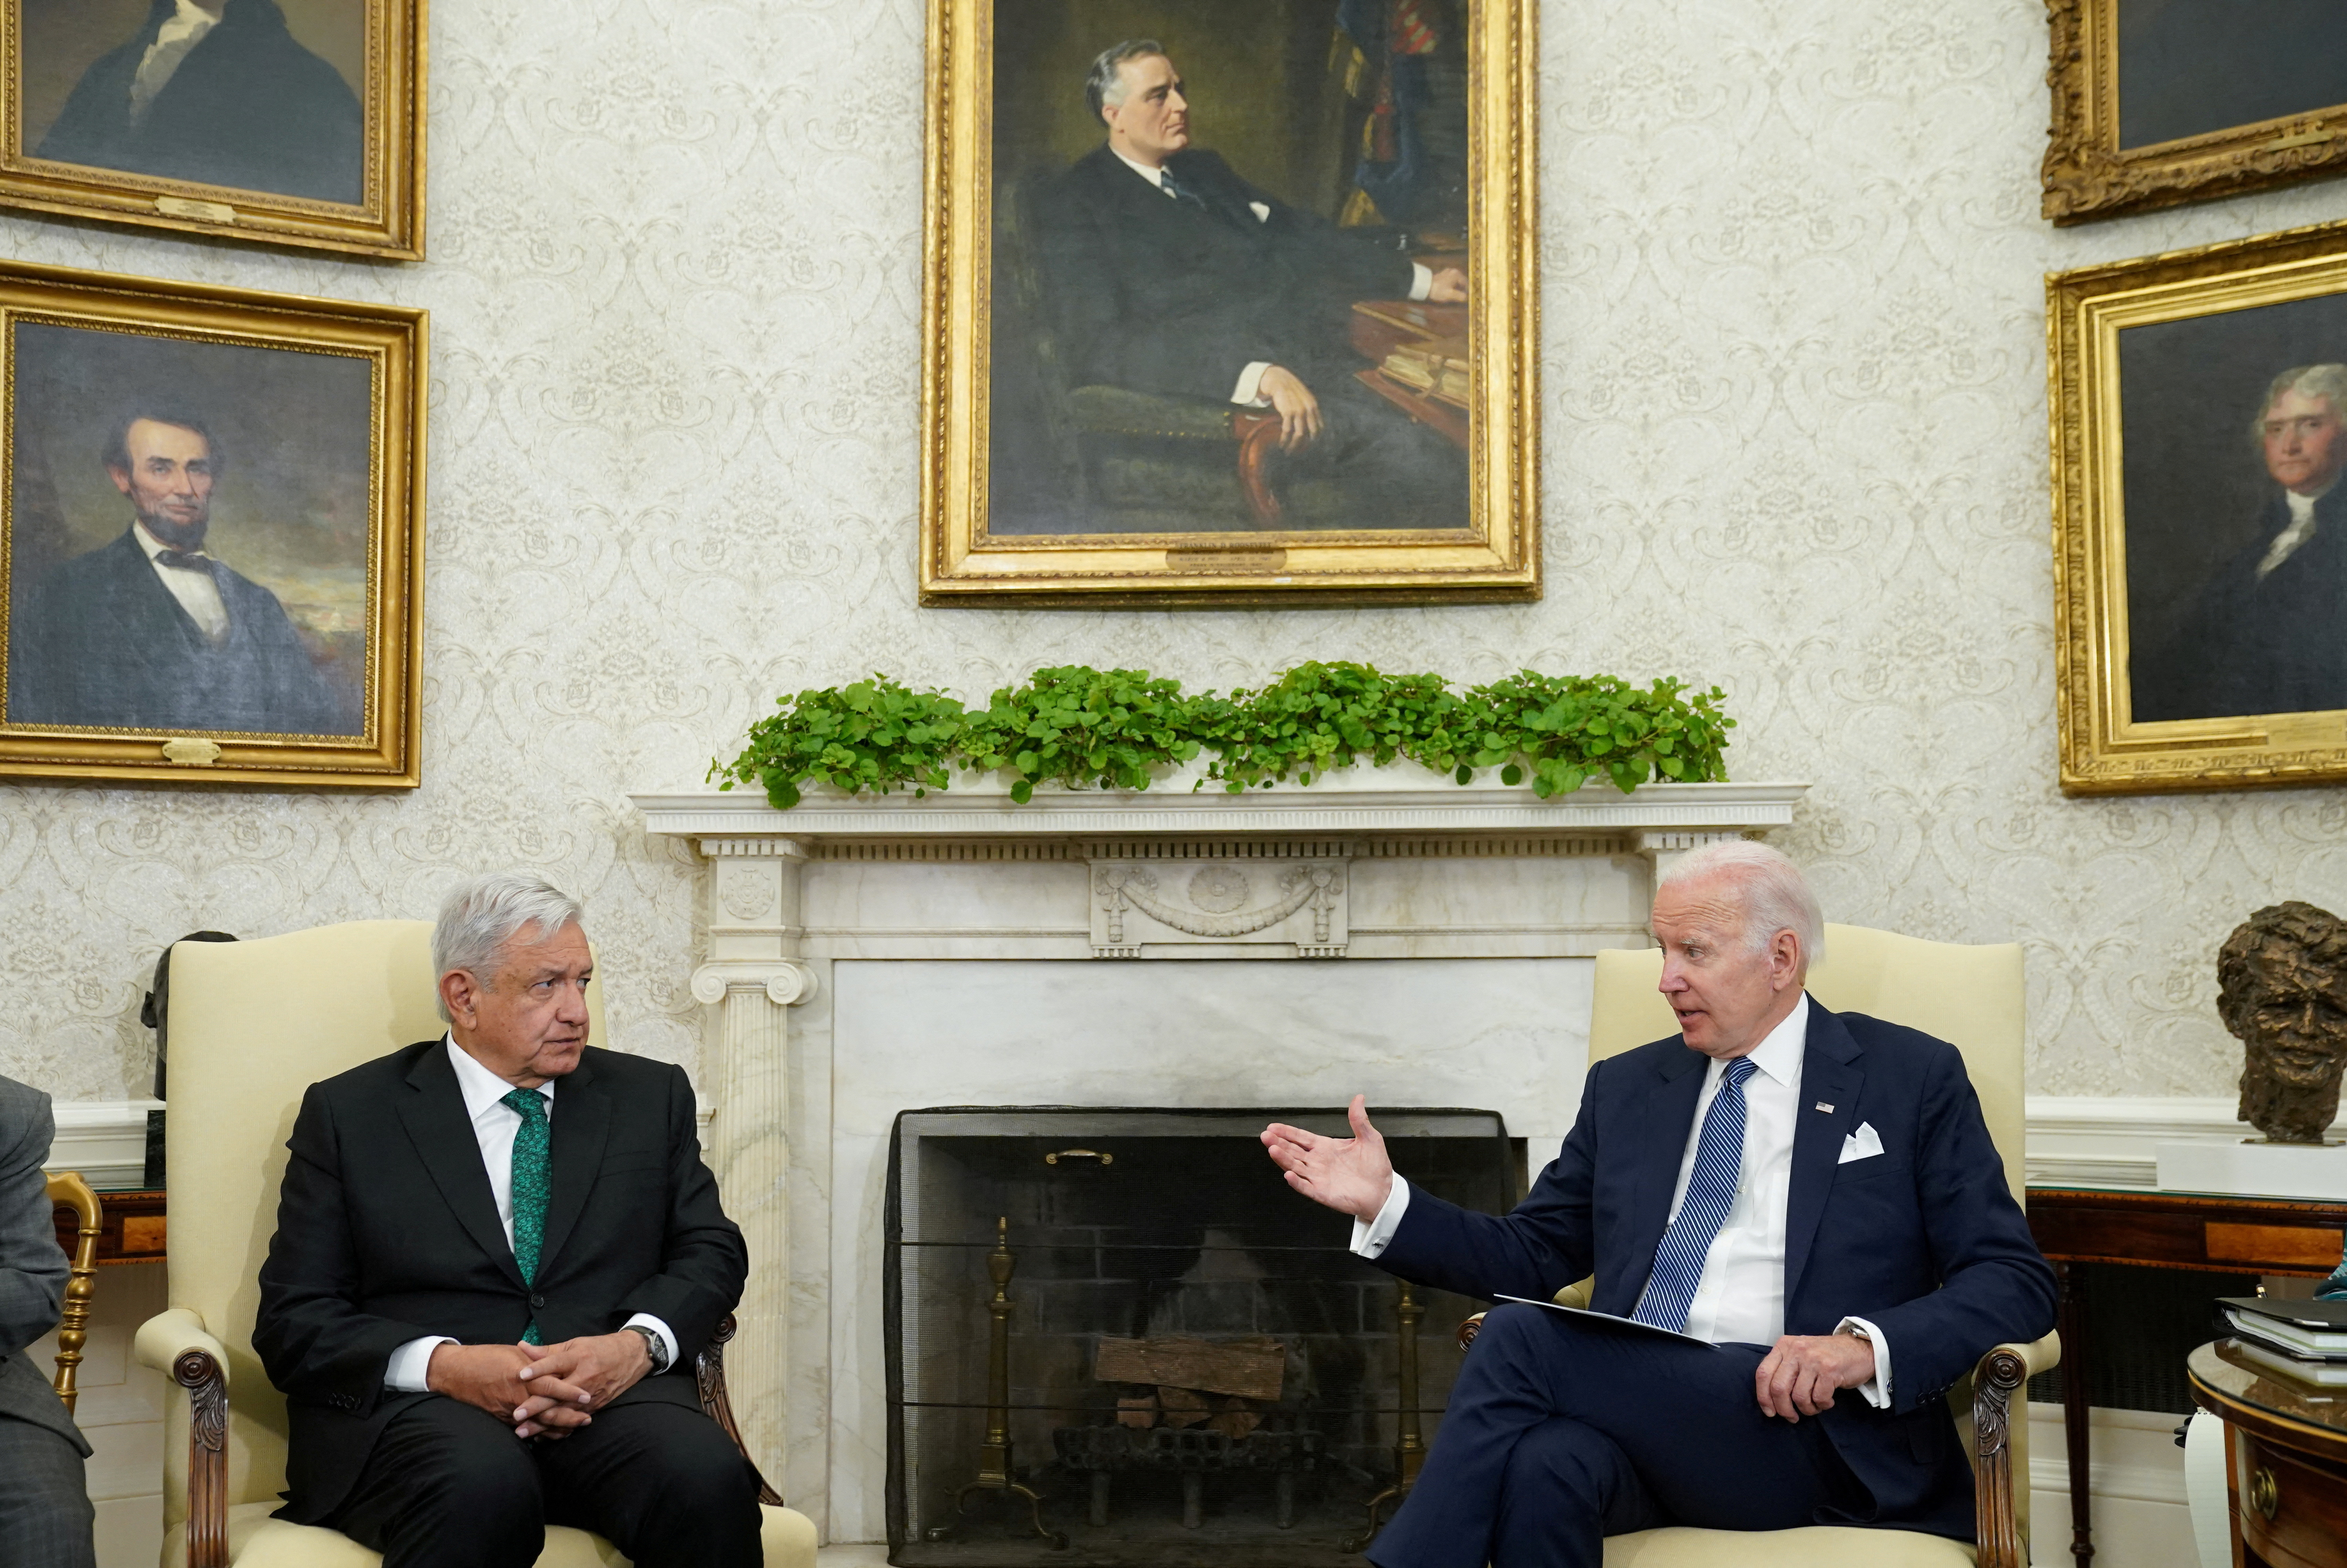 U.S. President Biden meets with Mexican President Andres Manuel Lopez Obrador at the White House in Washington